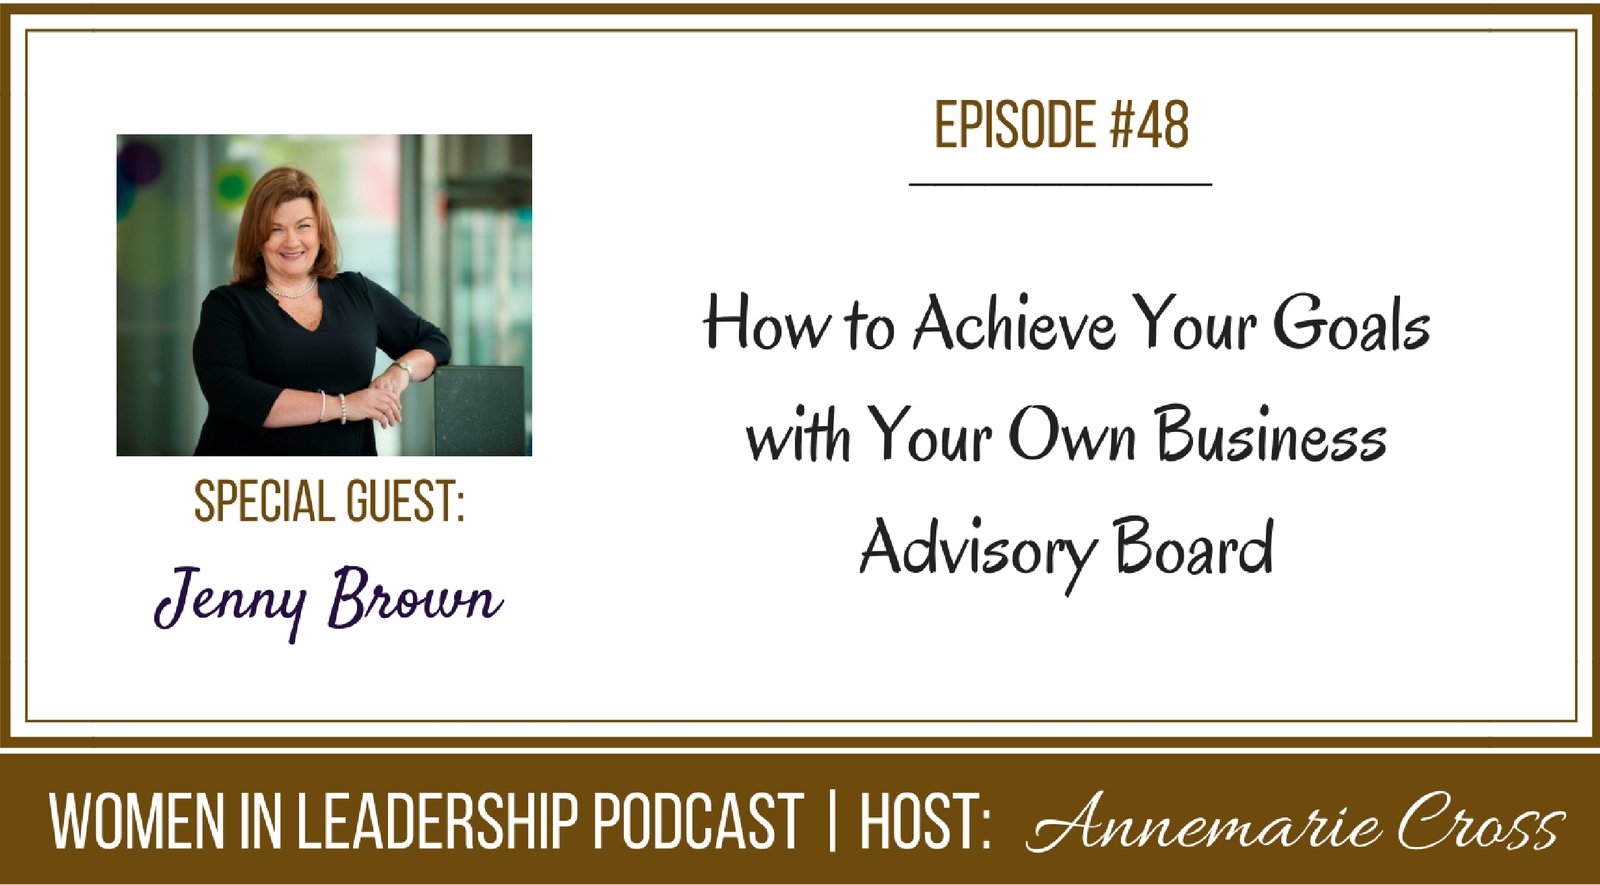 [Ep#48] How to Achieve Your Goals with Your Own Business Advisory Board [podcast]